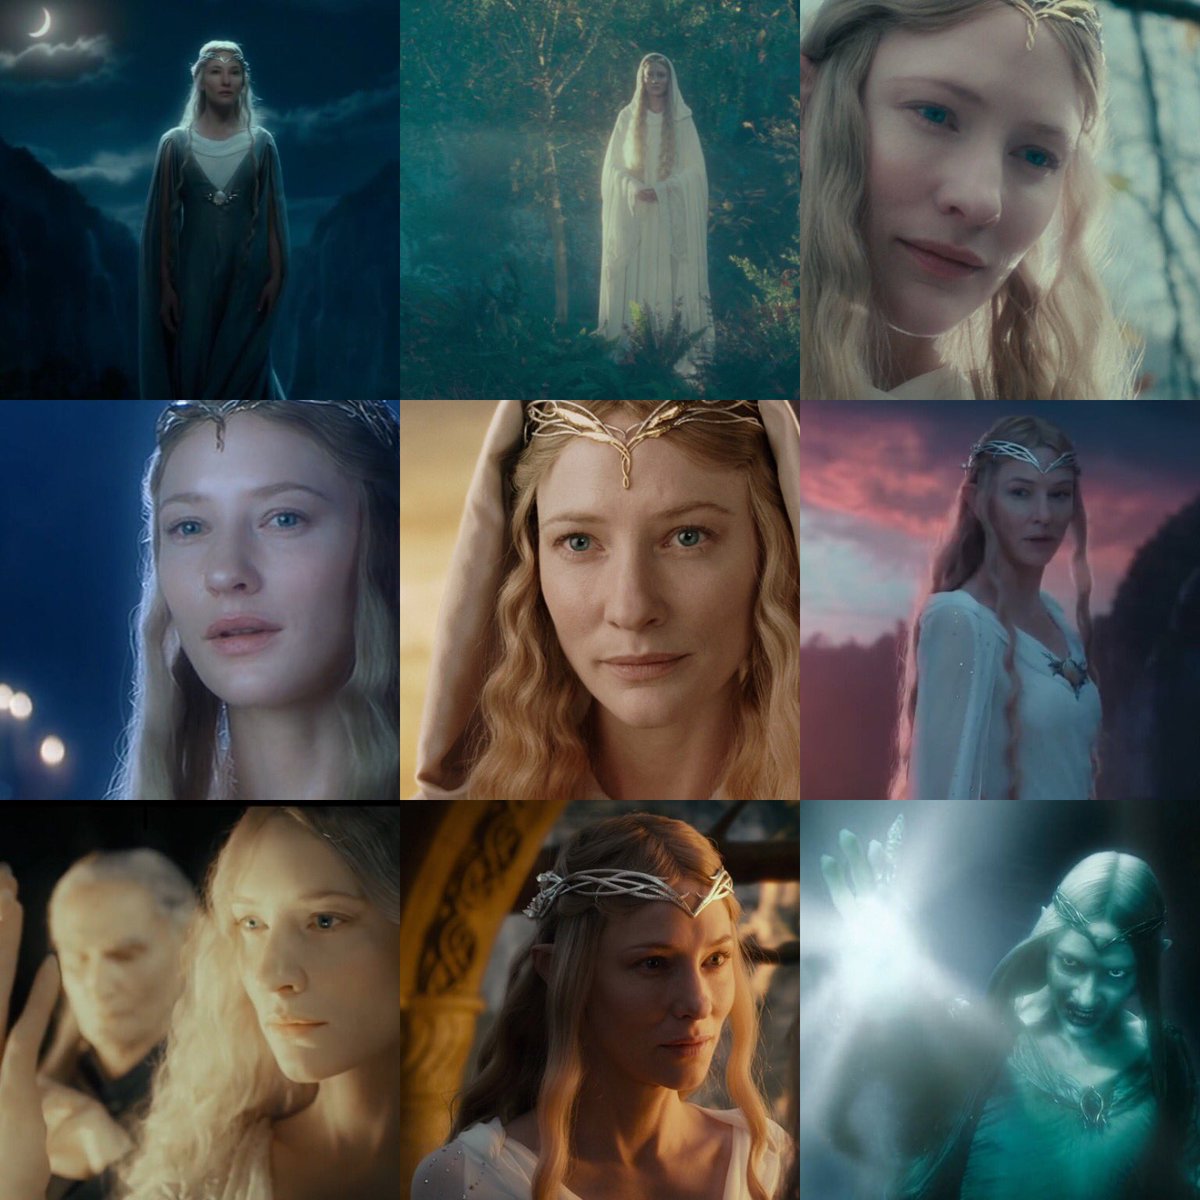 The lady of light, Galadriel.